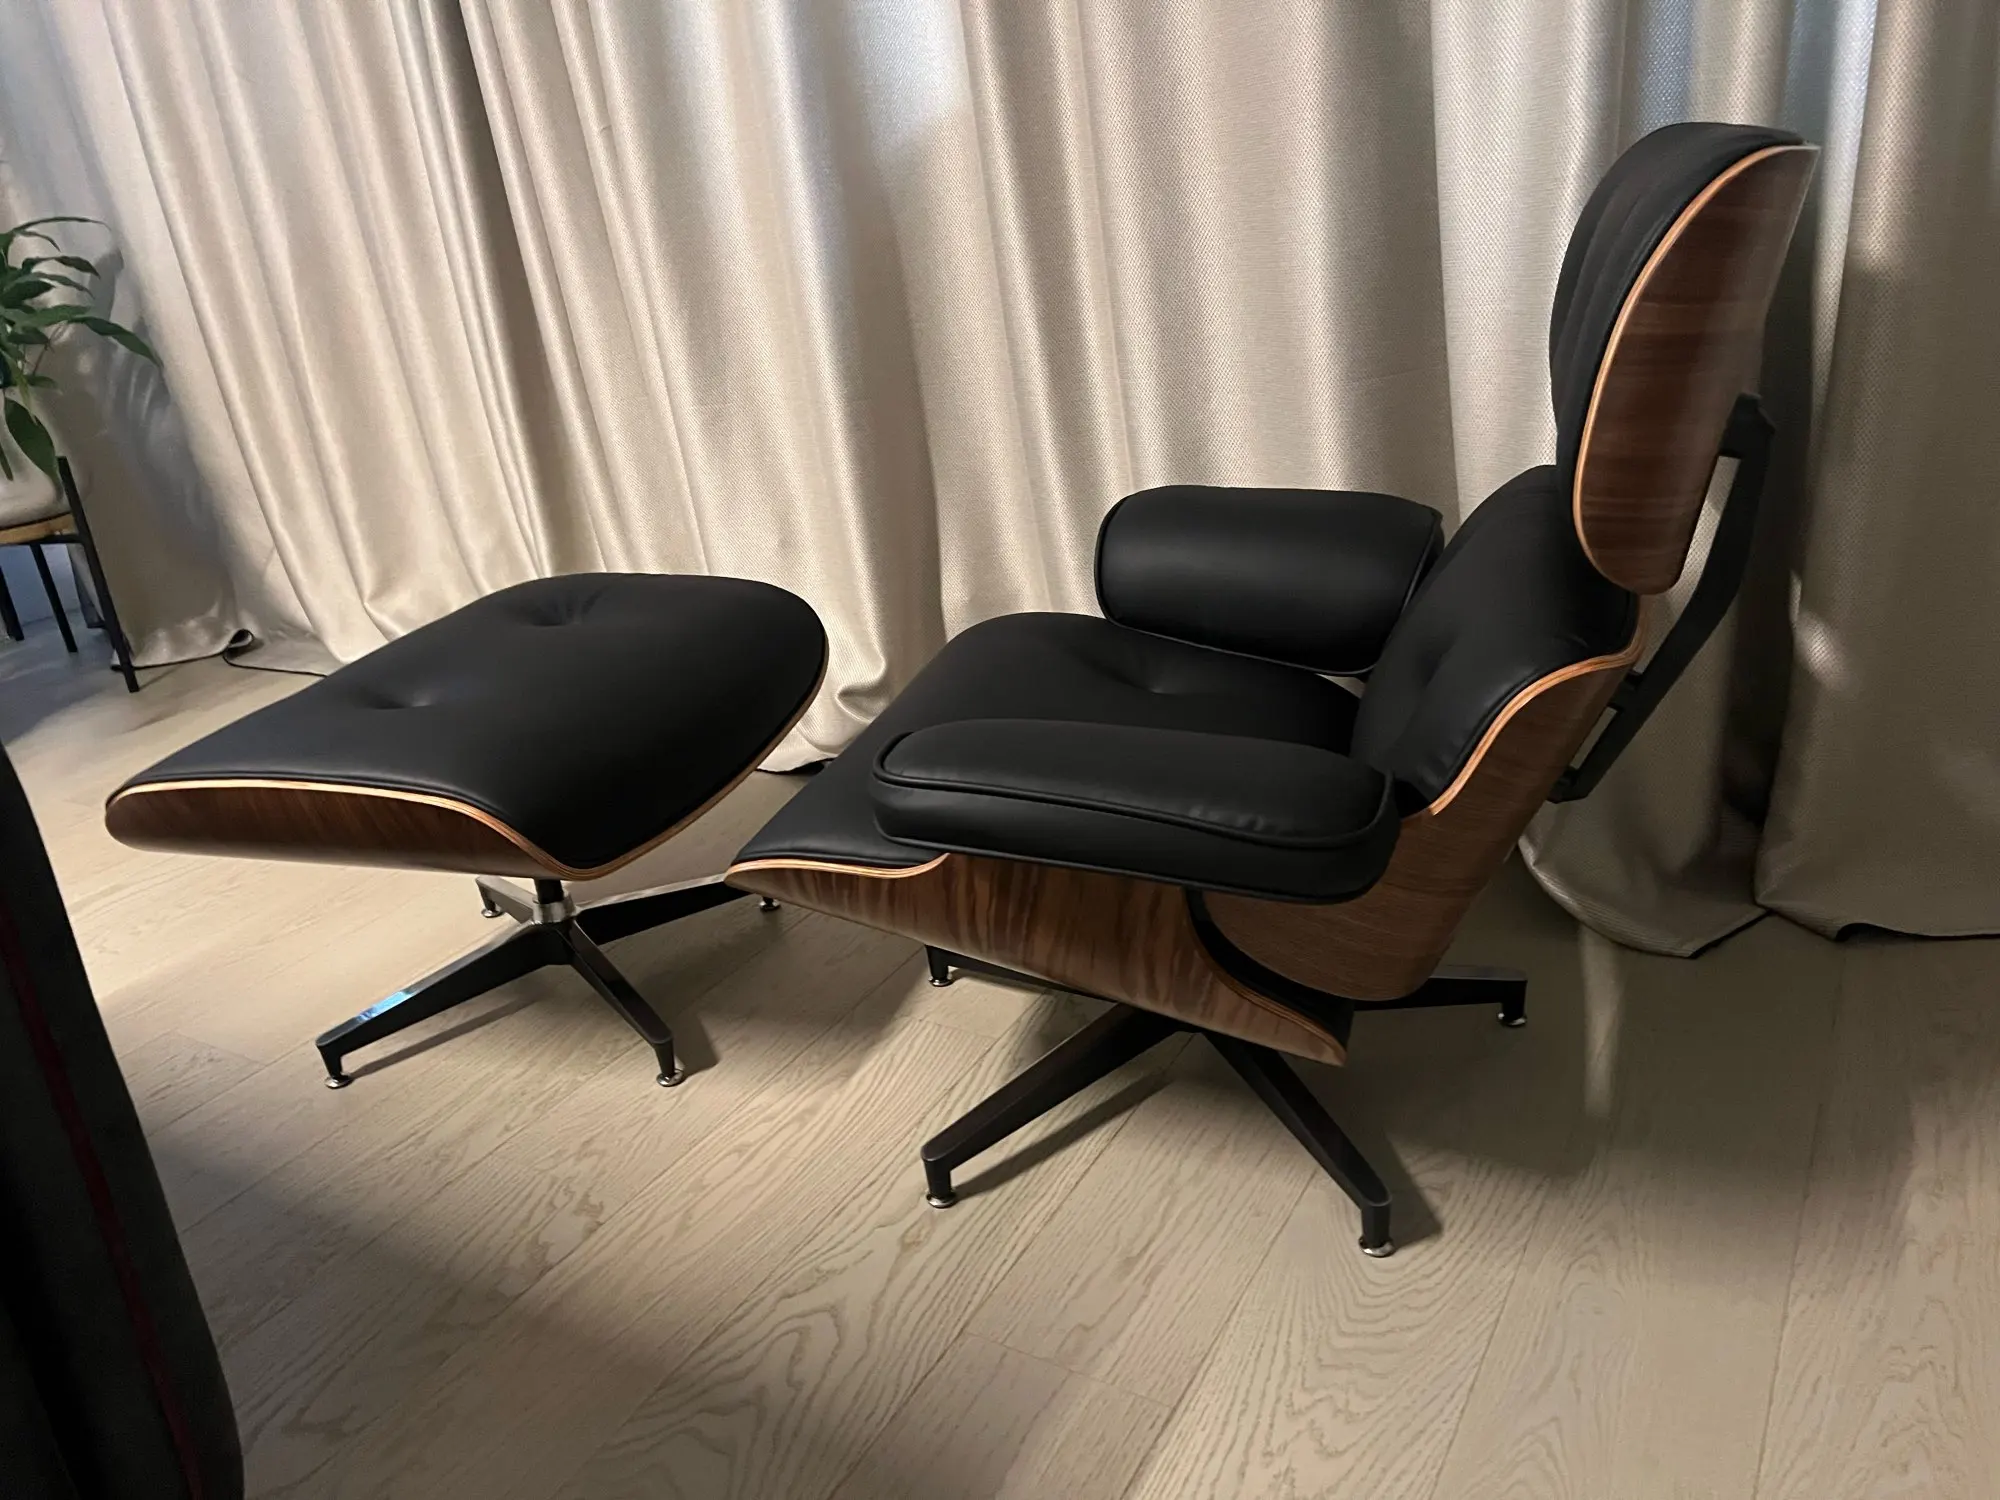 Daedalus Designs - Eames Mid-Century American Lounge Chair and Ottoman by Herman Miller | Genuine Leather | Walnut & Palisander Wood - Review